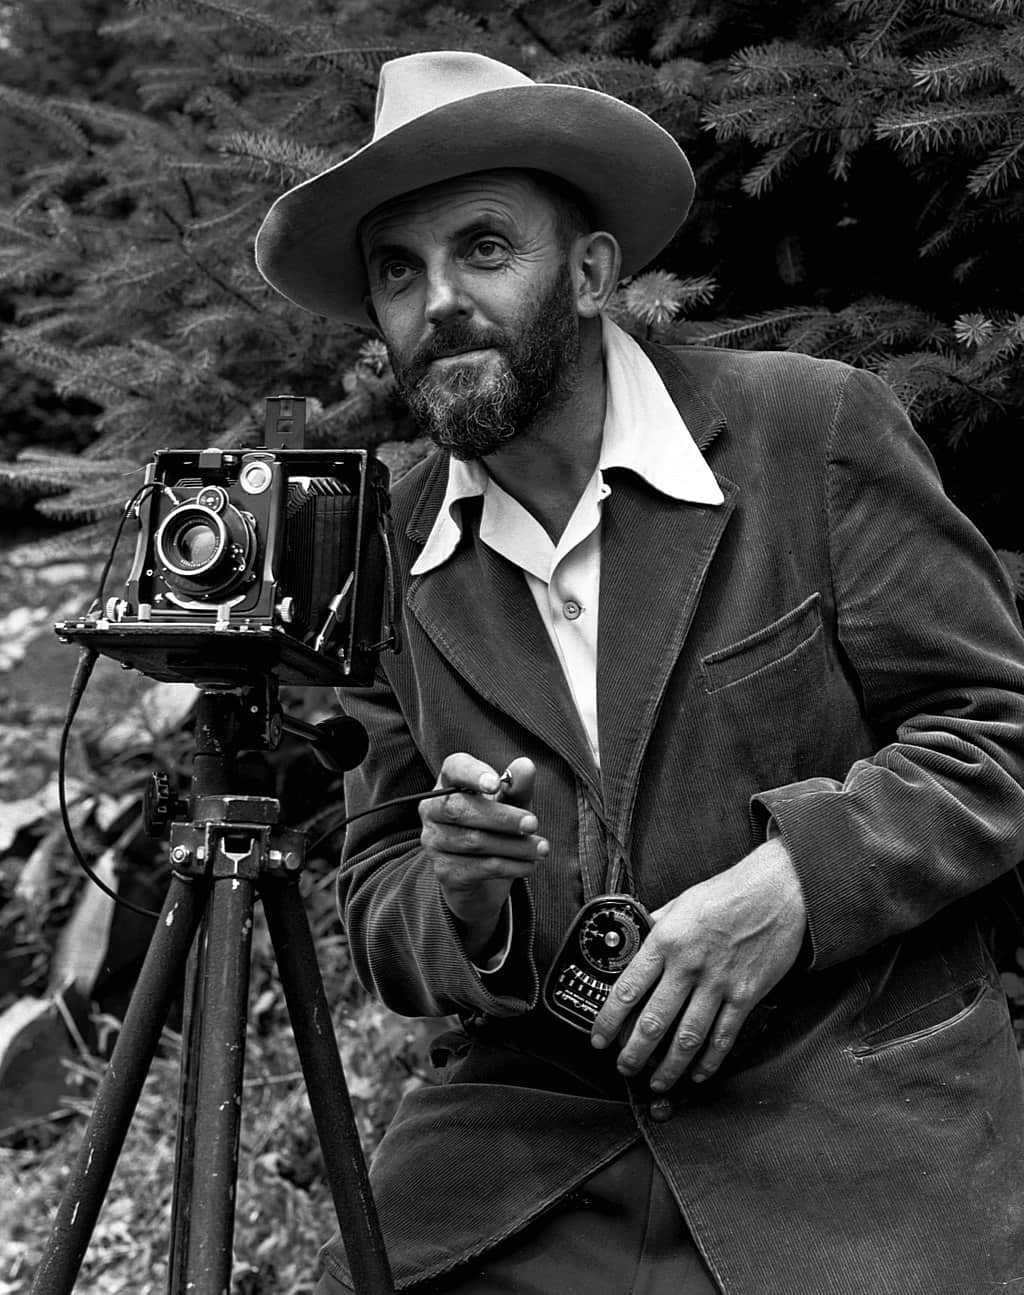 Famous photographer in history - Ansel Adams image 